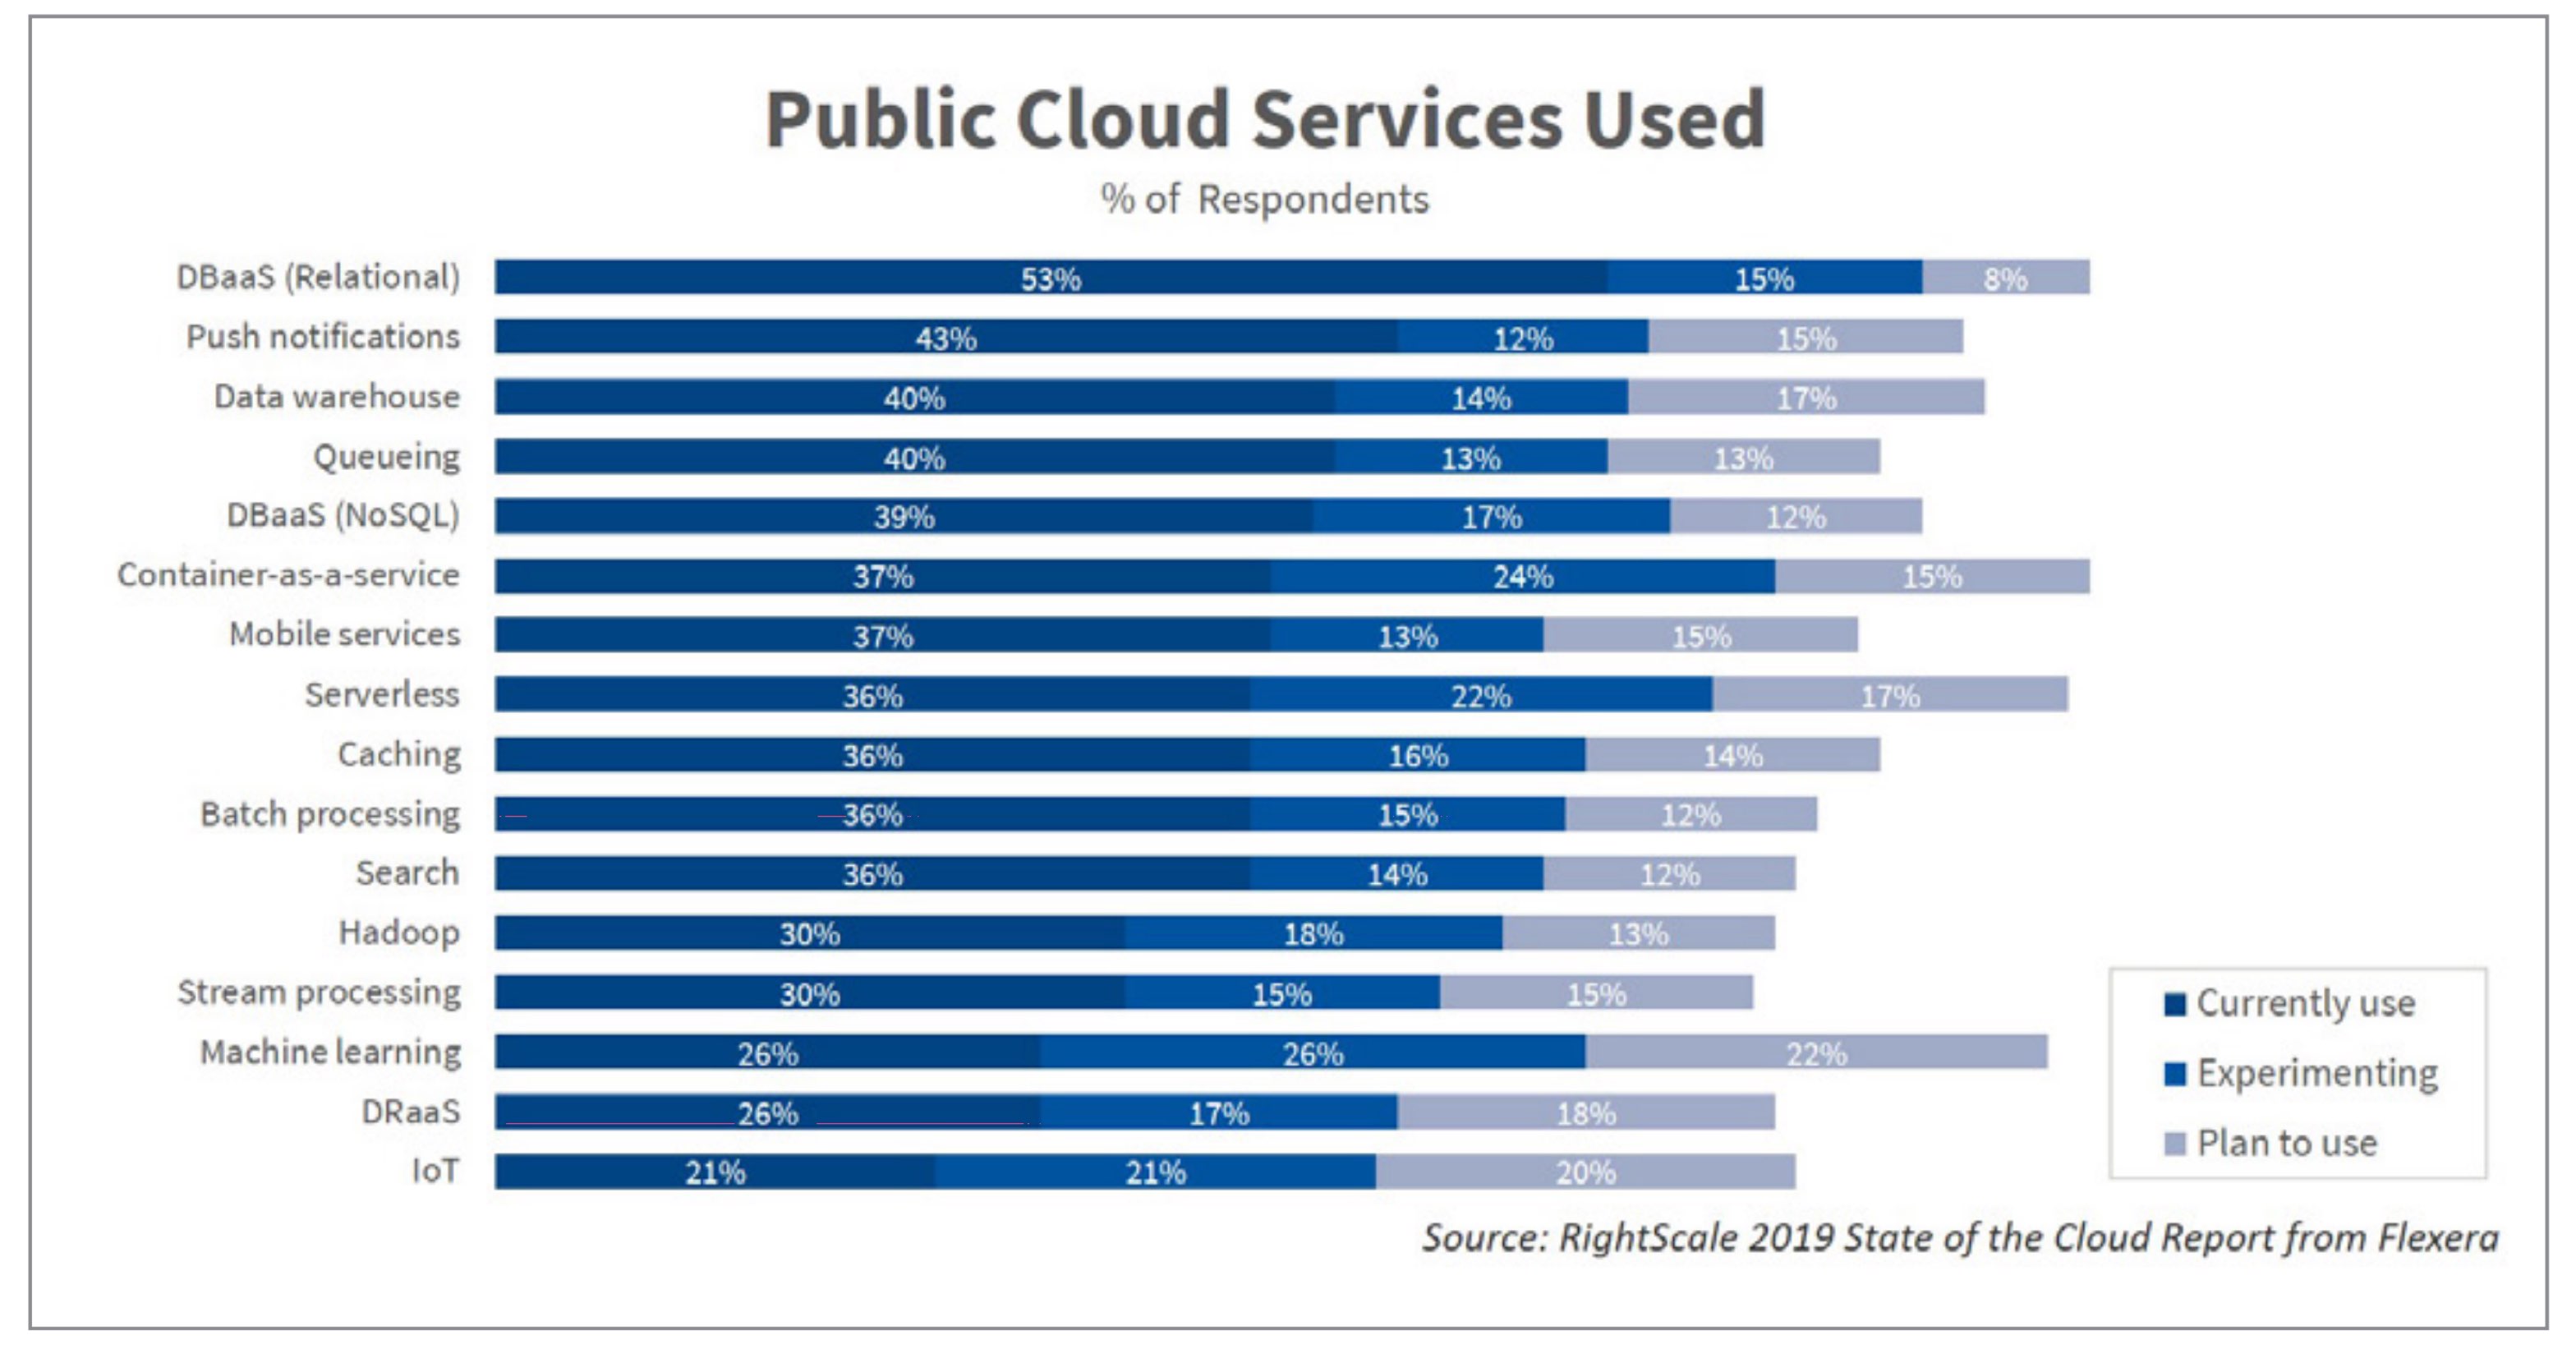 Public Cloud Services Used, RightScale 2019 State of the Cloud Report from Flexera